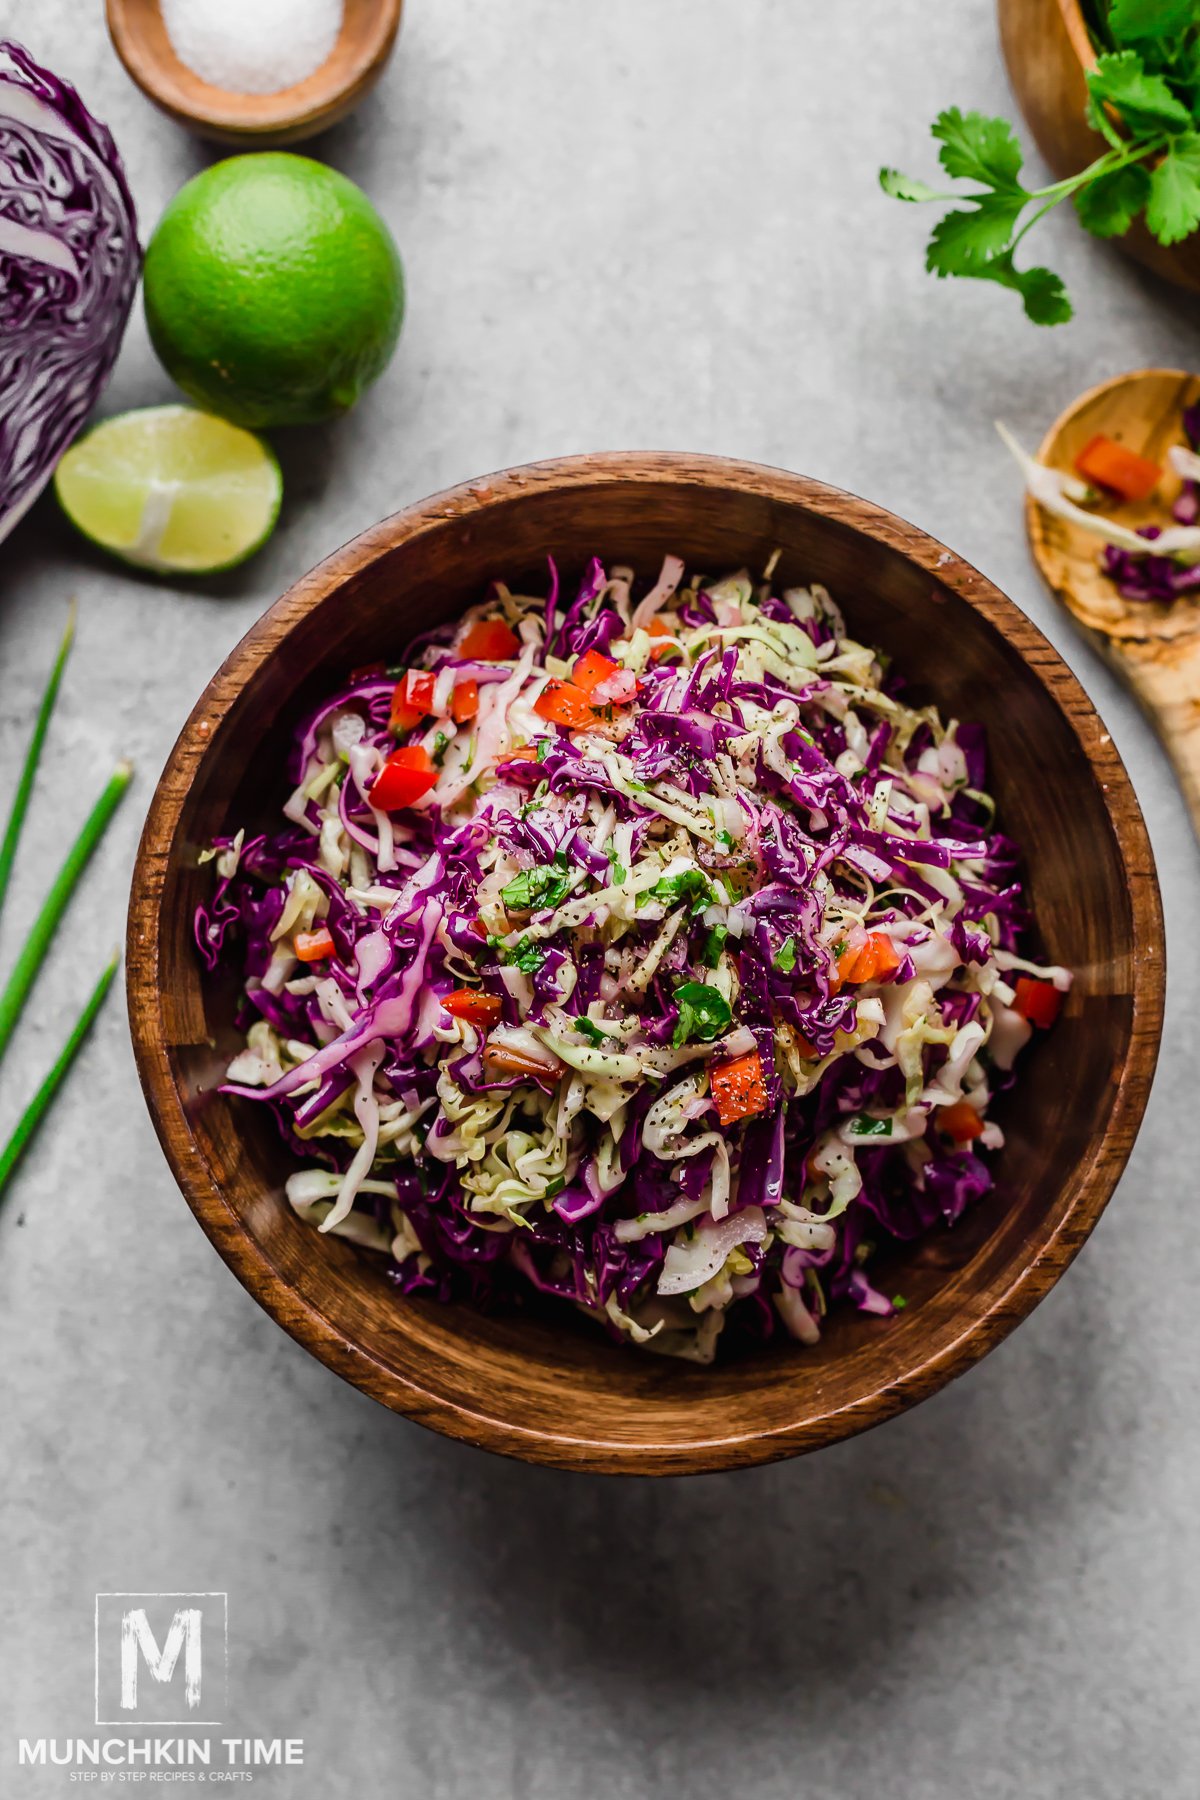 What type of cabbage is best for cabbage salad?